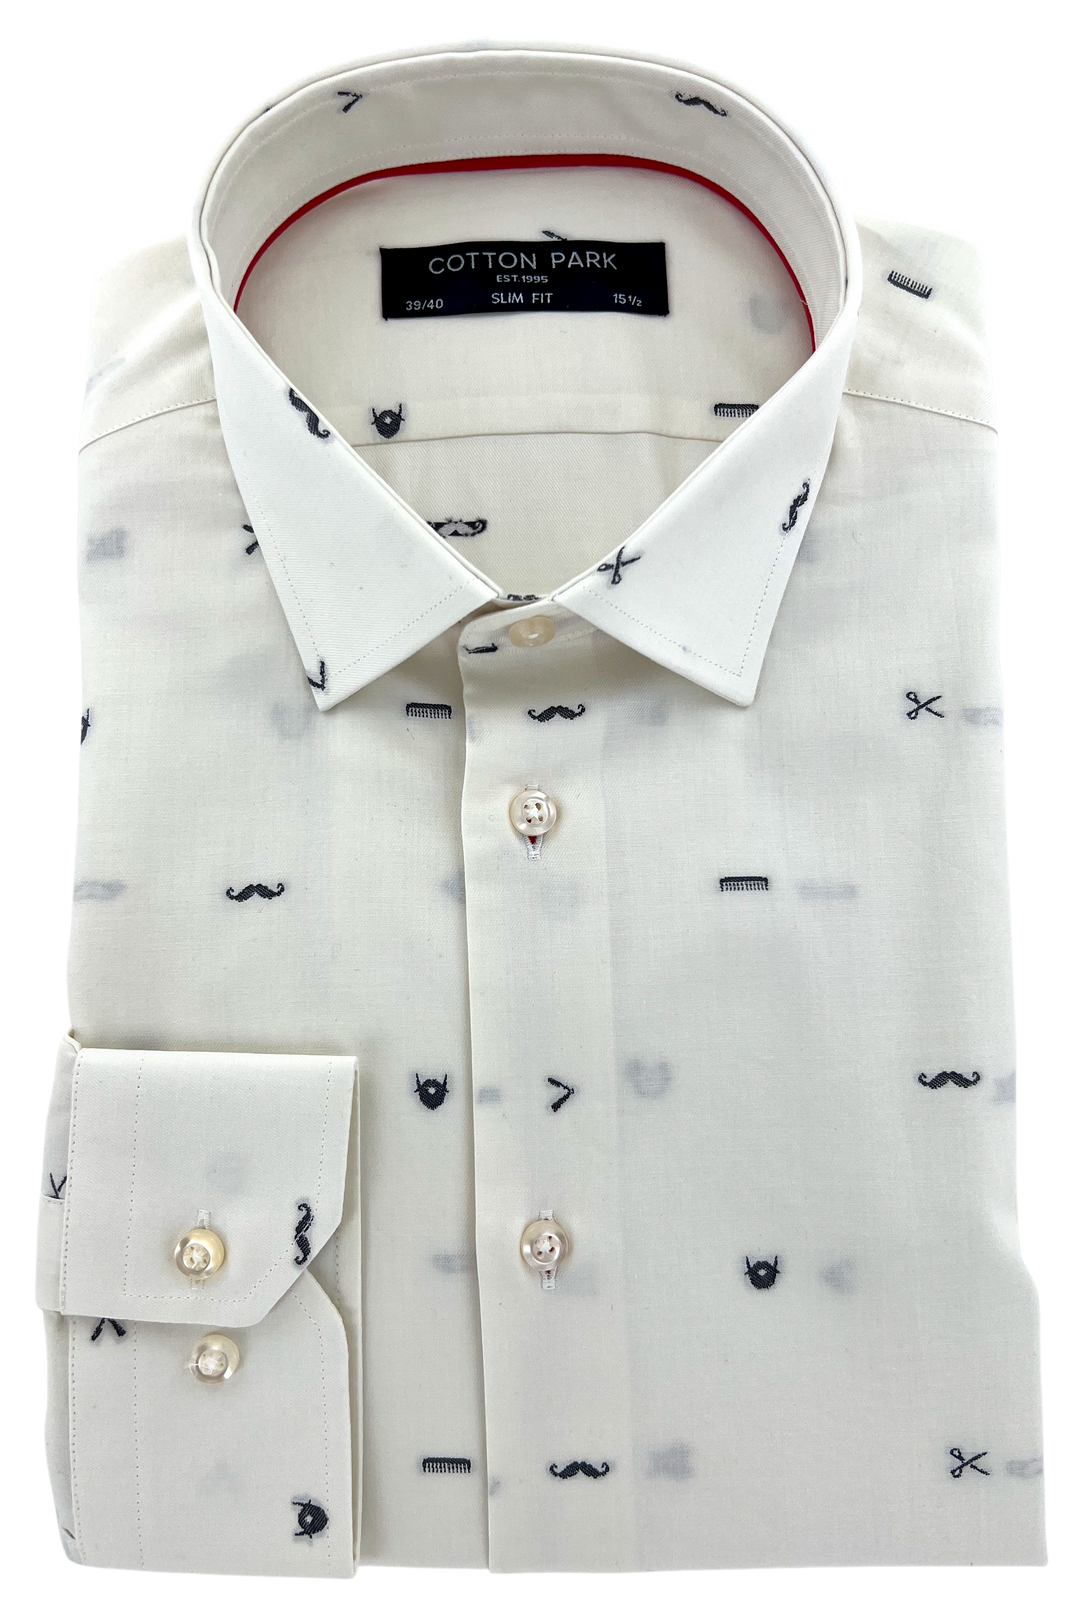 Fitted shirt in patterned ecru twill